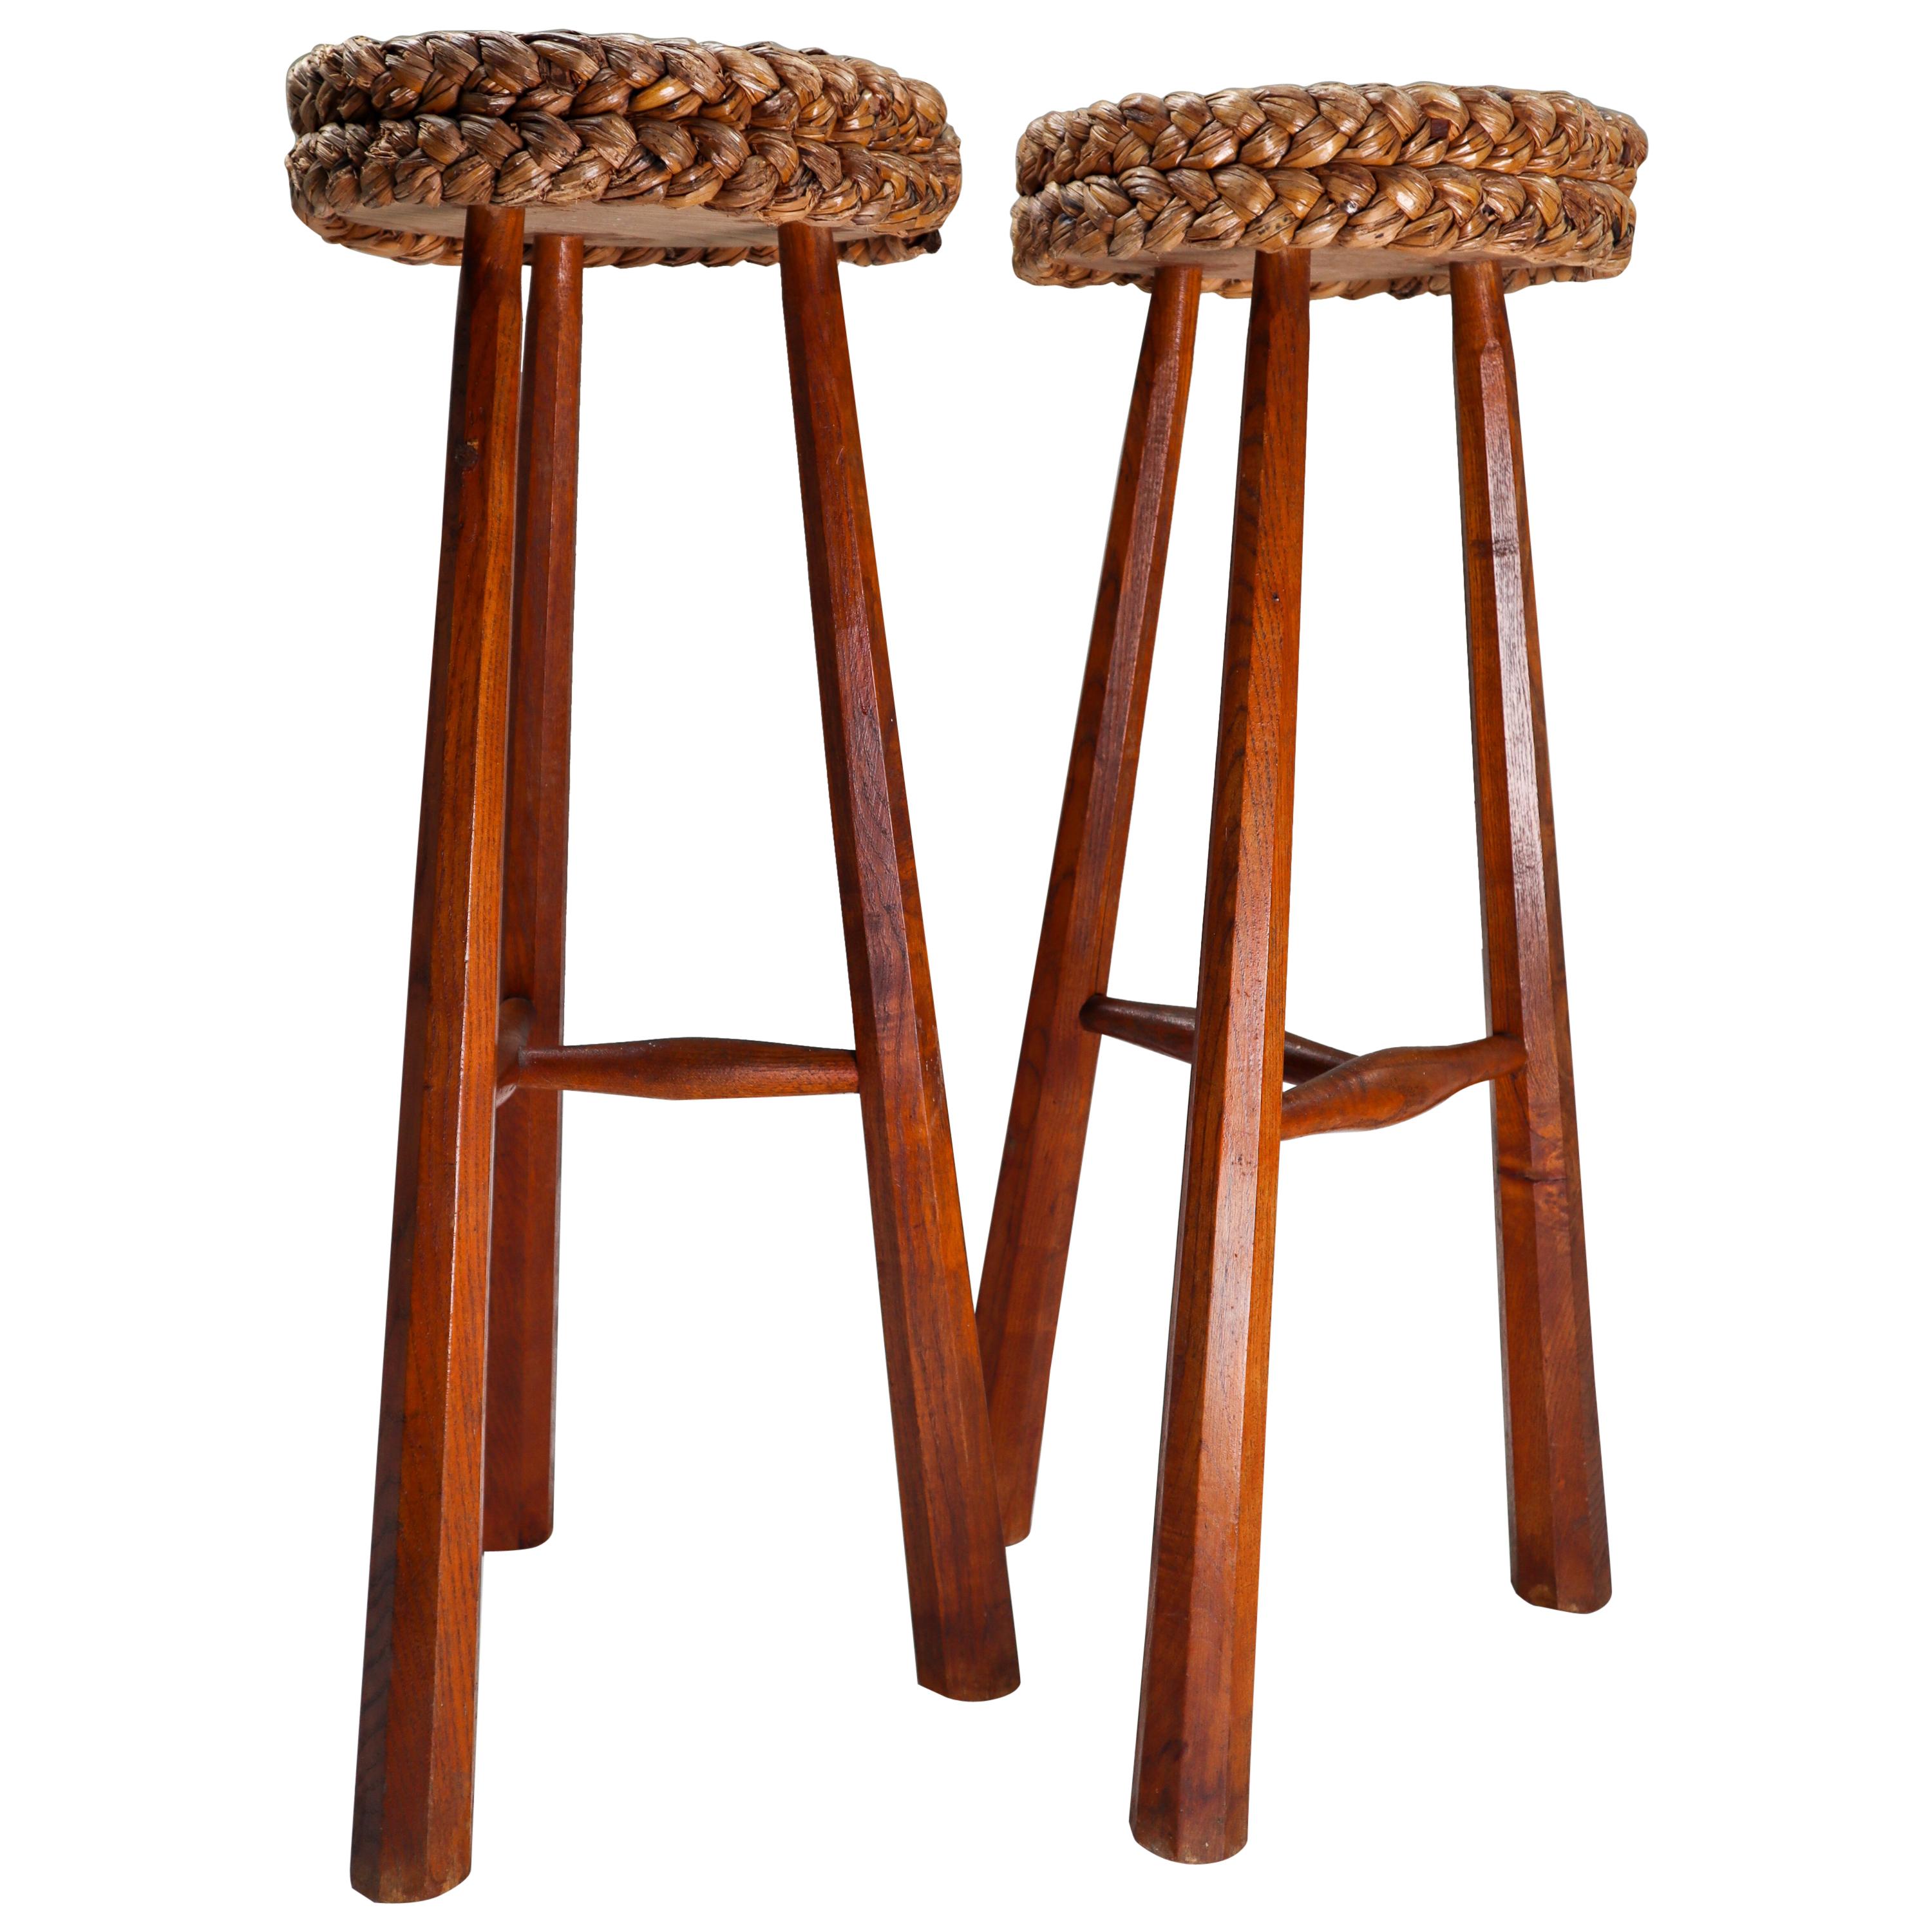 Two Bar Stools by Adrien Audoux & Frida Minet, France, 1950s